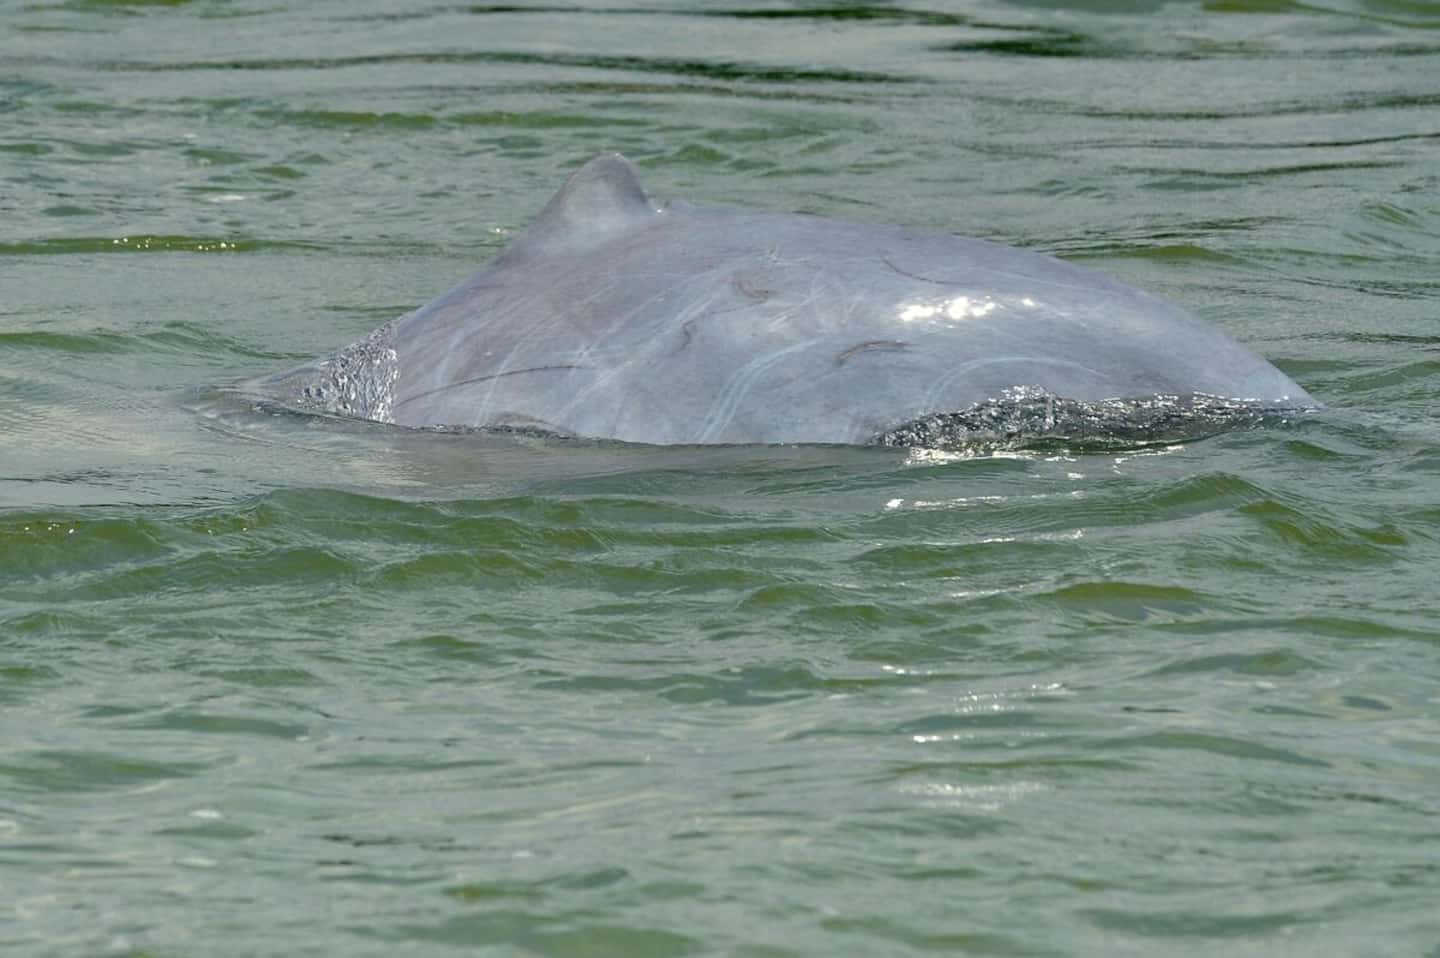 Cambodia: towards the creation of endangered dolphin protection zones on the Mekong